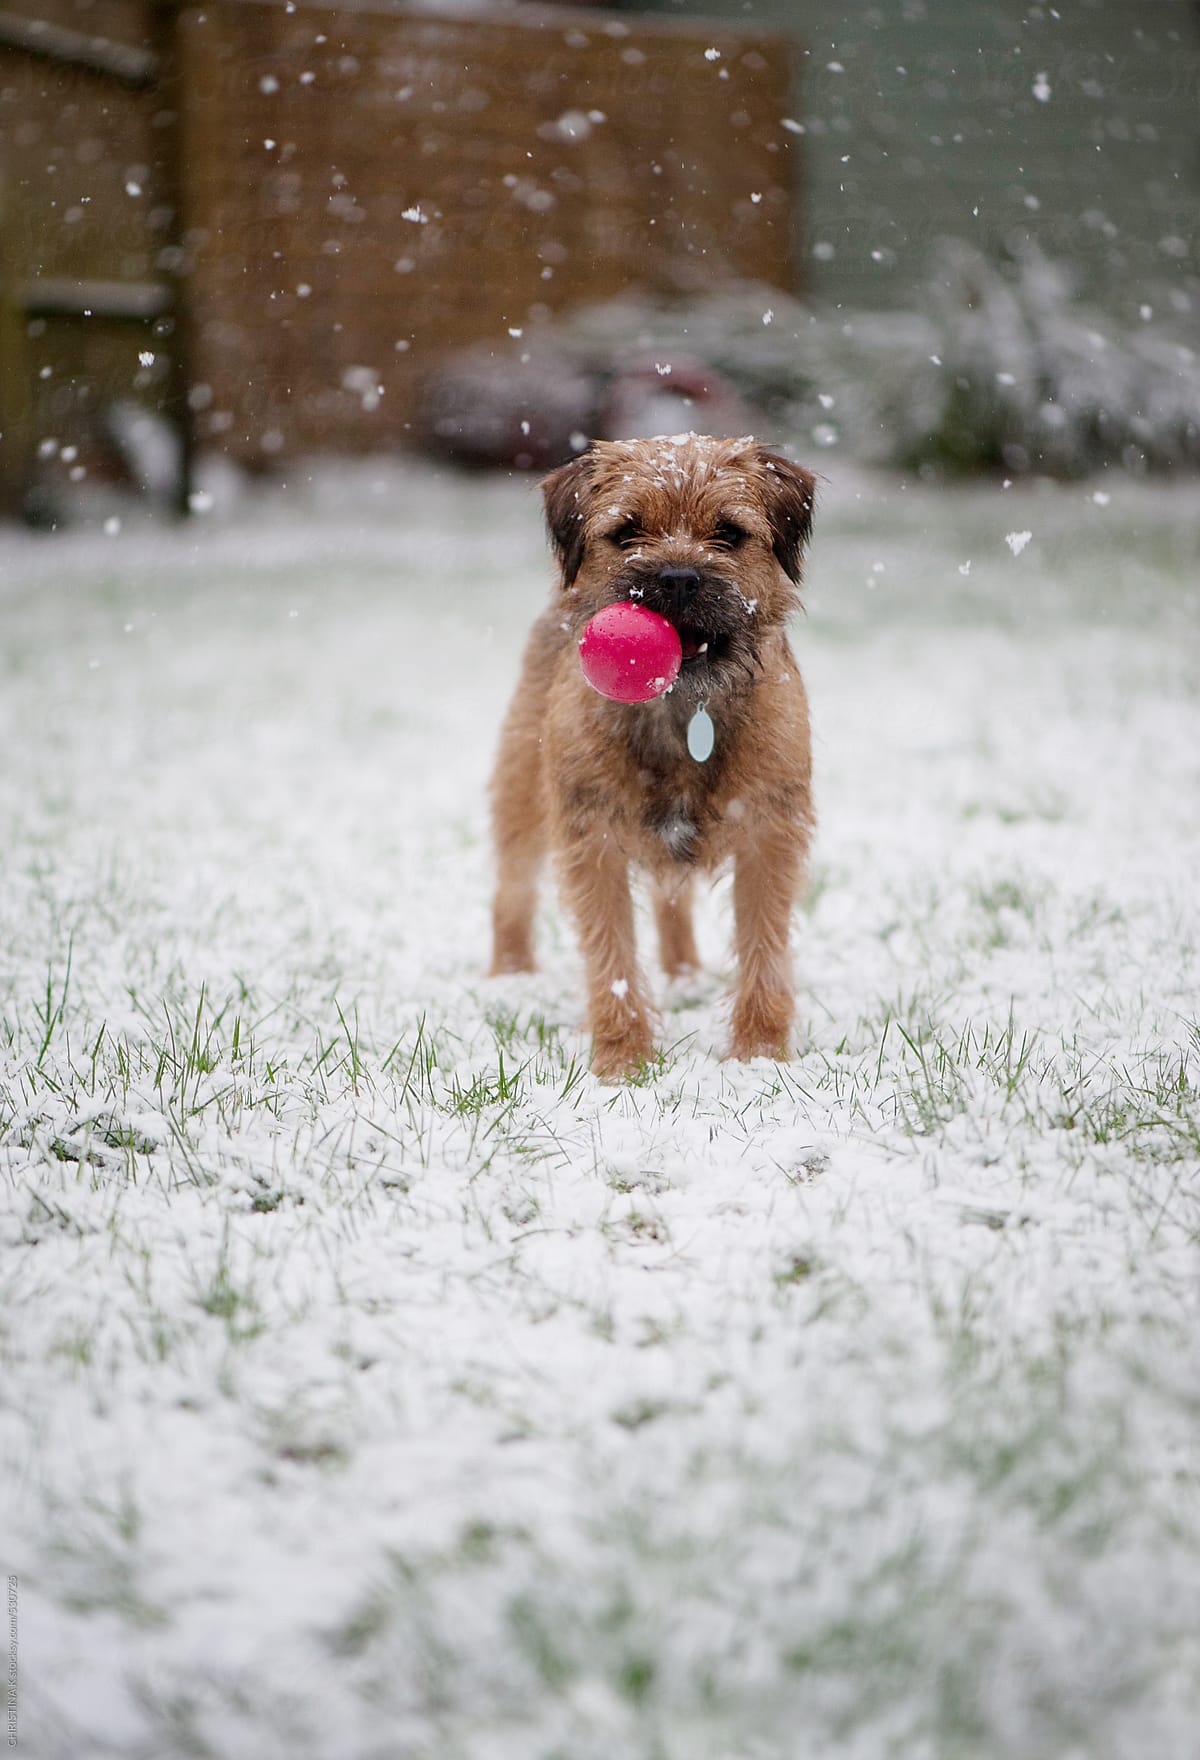 Dog with a red ball in a snowy garden